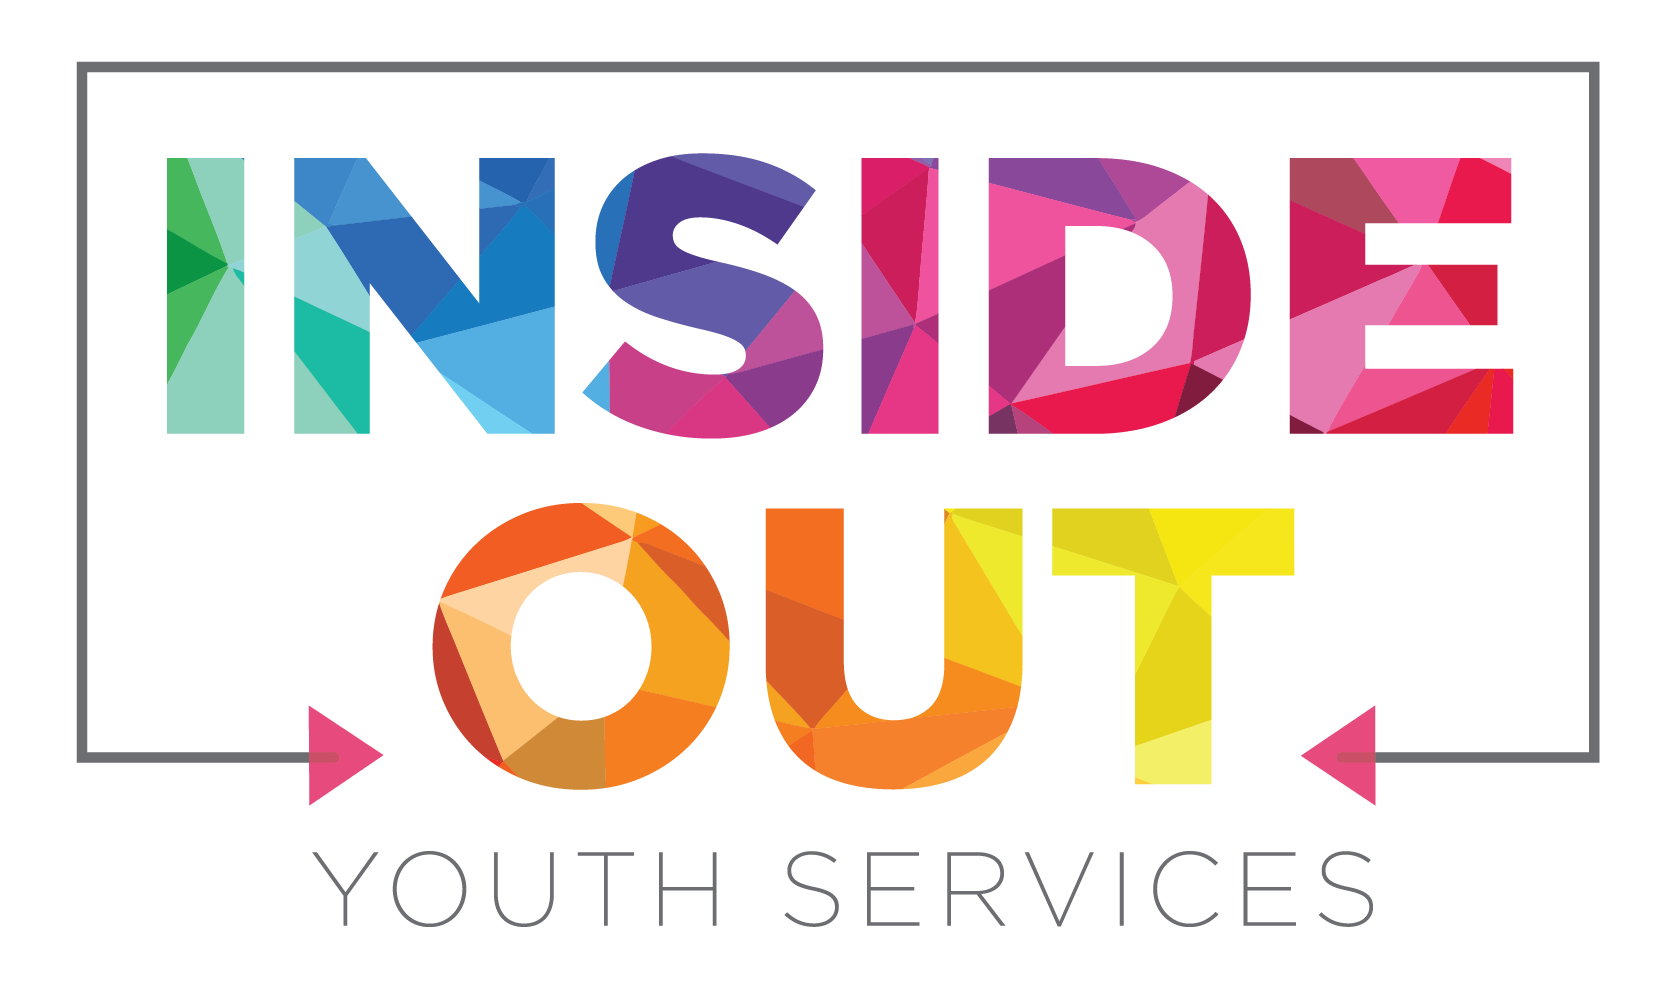 Inside Out Youth Services logo